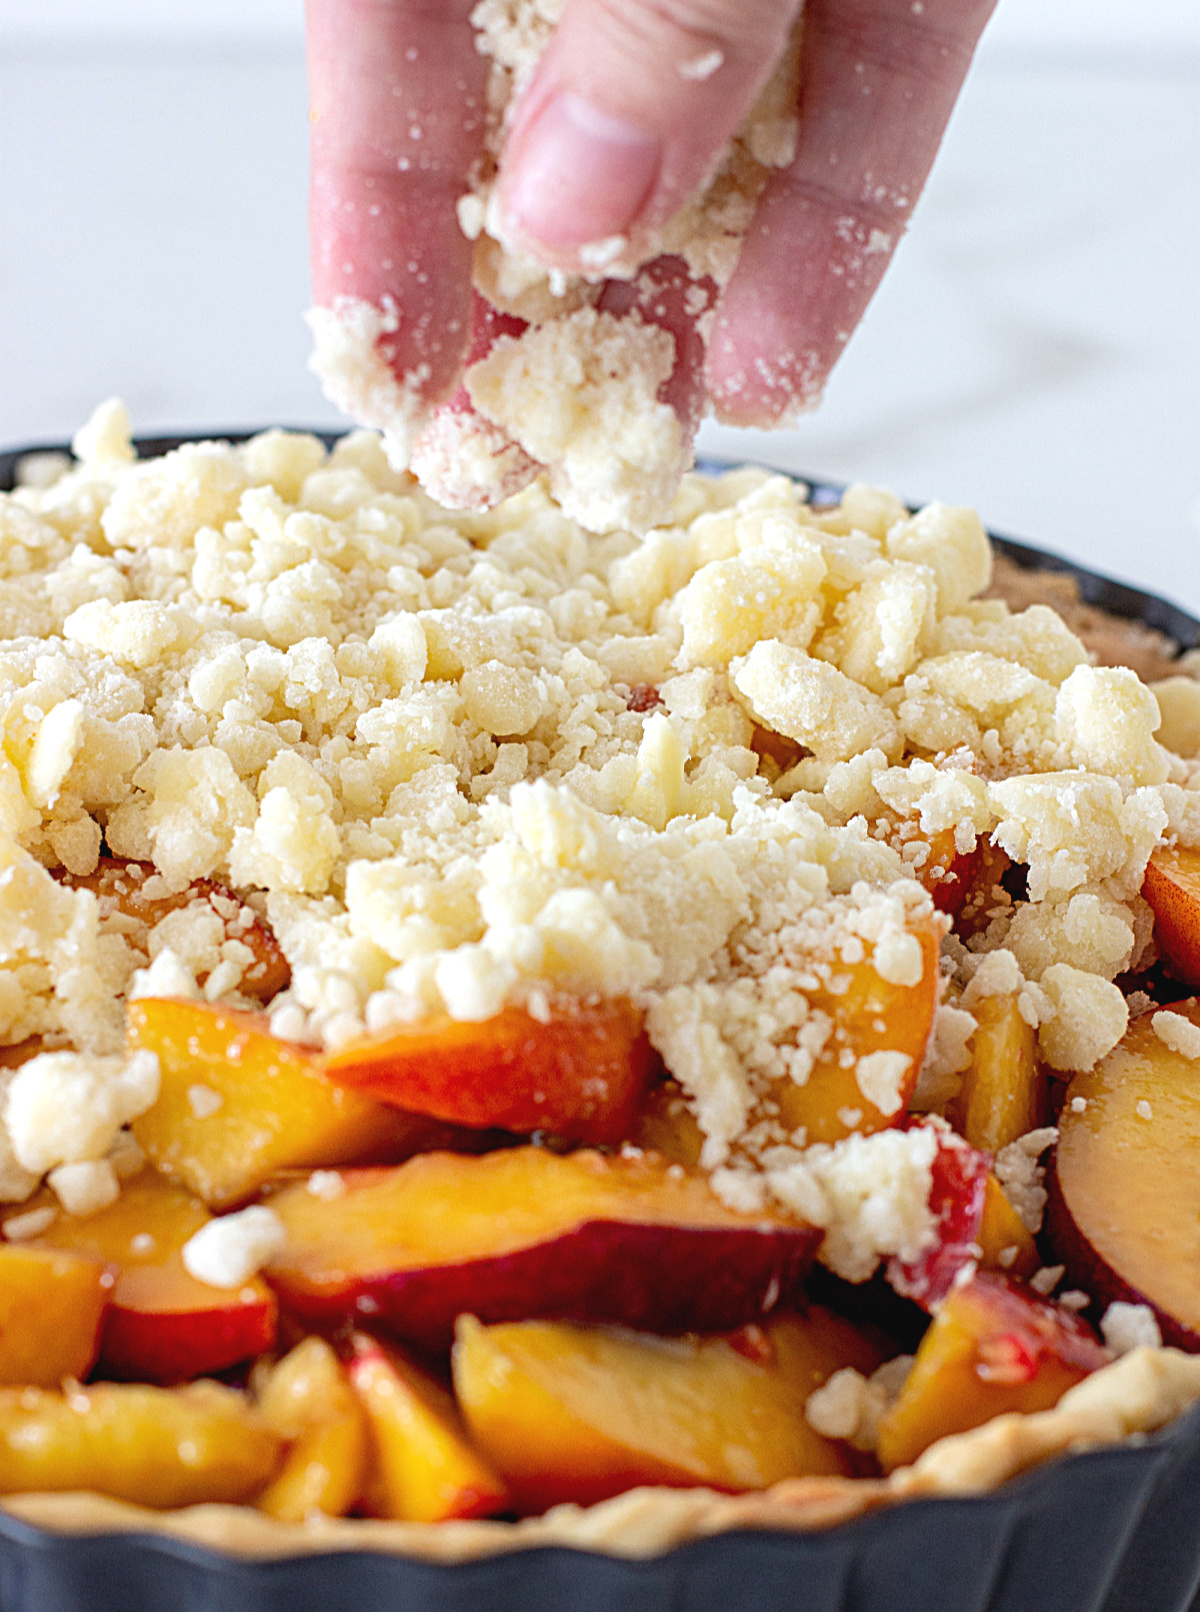 Hand adding crumble to peaches in pie metal pan